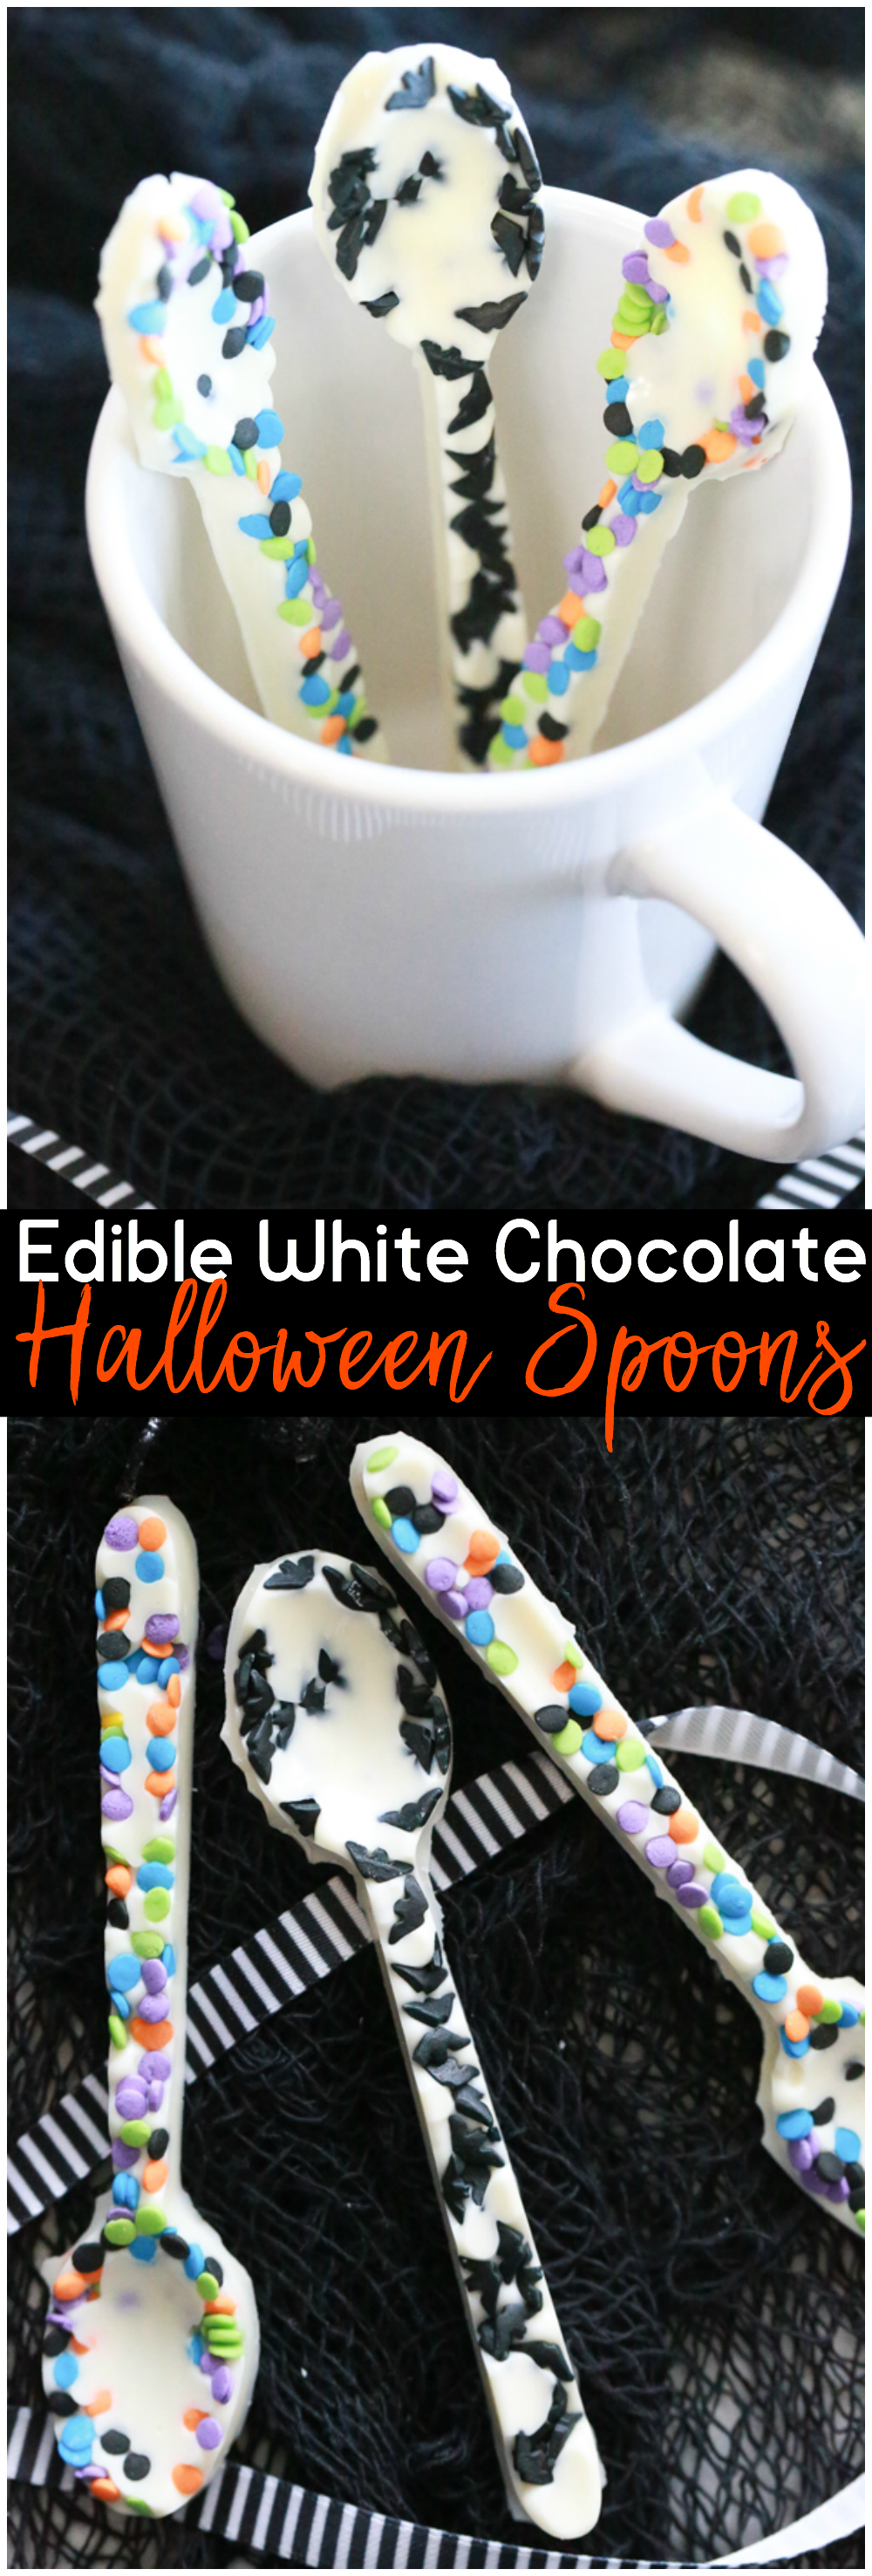 Use the Edible White Chocolate Halloween Spoons in your favorite hot drink or as a festive treat for Halloween.